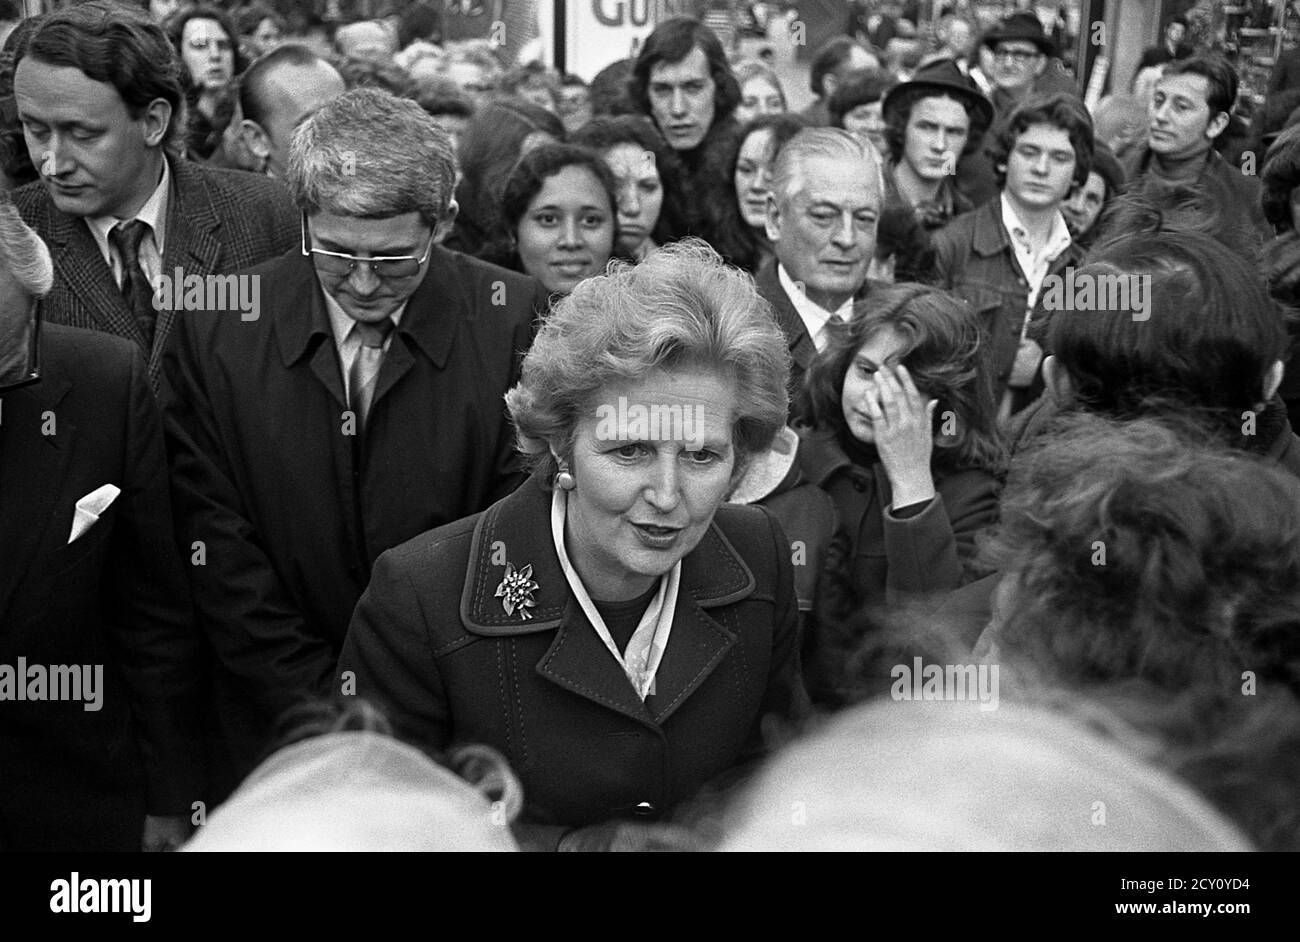 AJAXNETPHOTO.11TH FEBRUARY,1977. PORTSMOUTH, ENGLAND.  - CITY WALKABOUT - MRS MARGARET THATCHER (CON), LEADER OF THE OPPOSITION, ENGAGES WITH THE PUBLIC IN COMMERCIAL ROAD SHOPPING PRECINCT DURING A CAMPAIGN WALKABOUT. PHOTO:JONATHAN EASTLAND/AJAX REF:3771102 48 Stock Photo